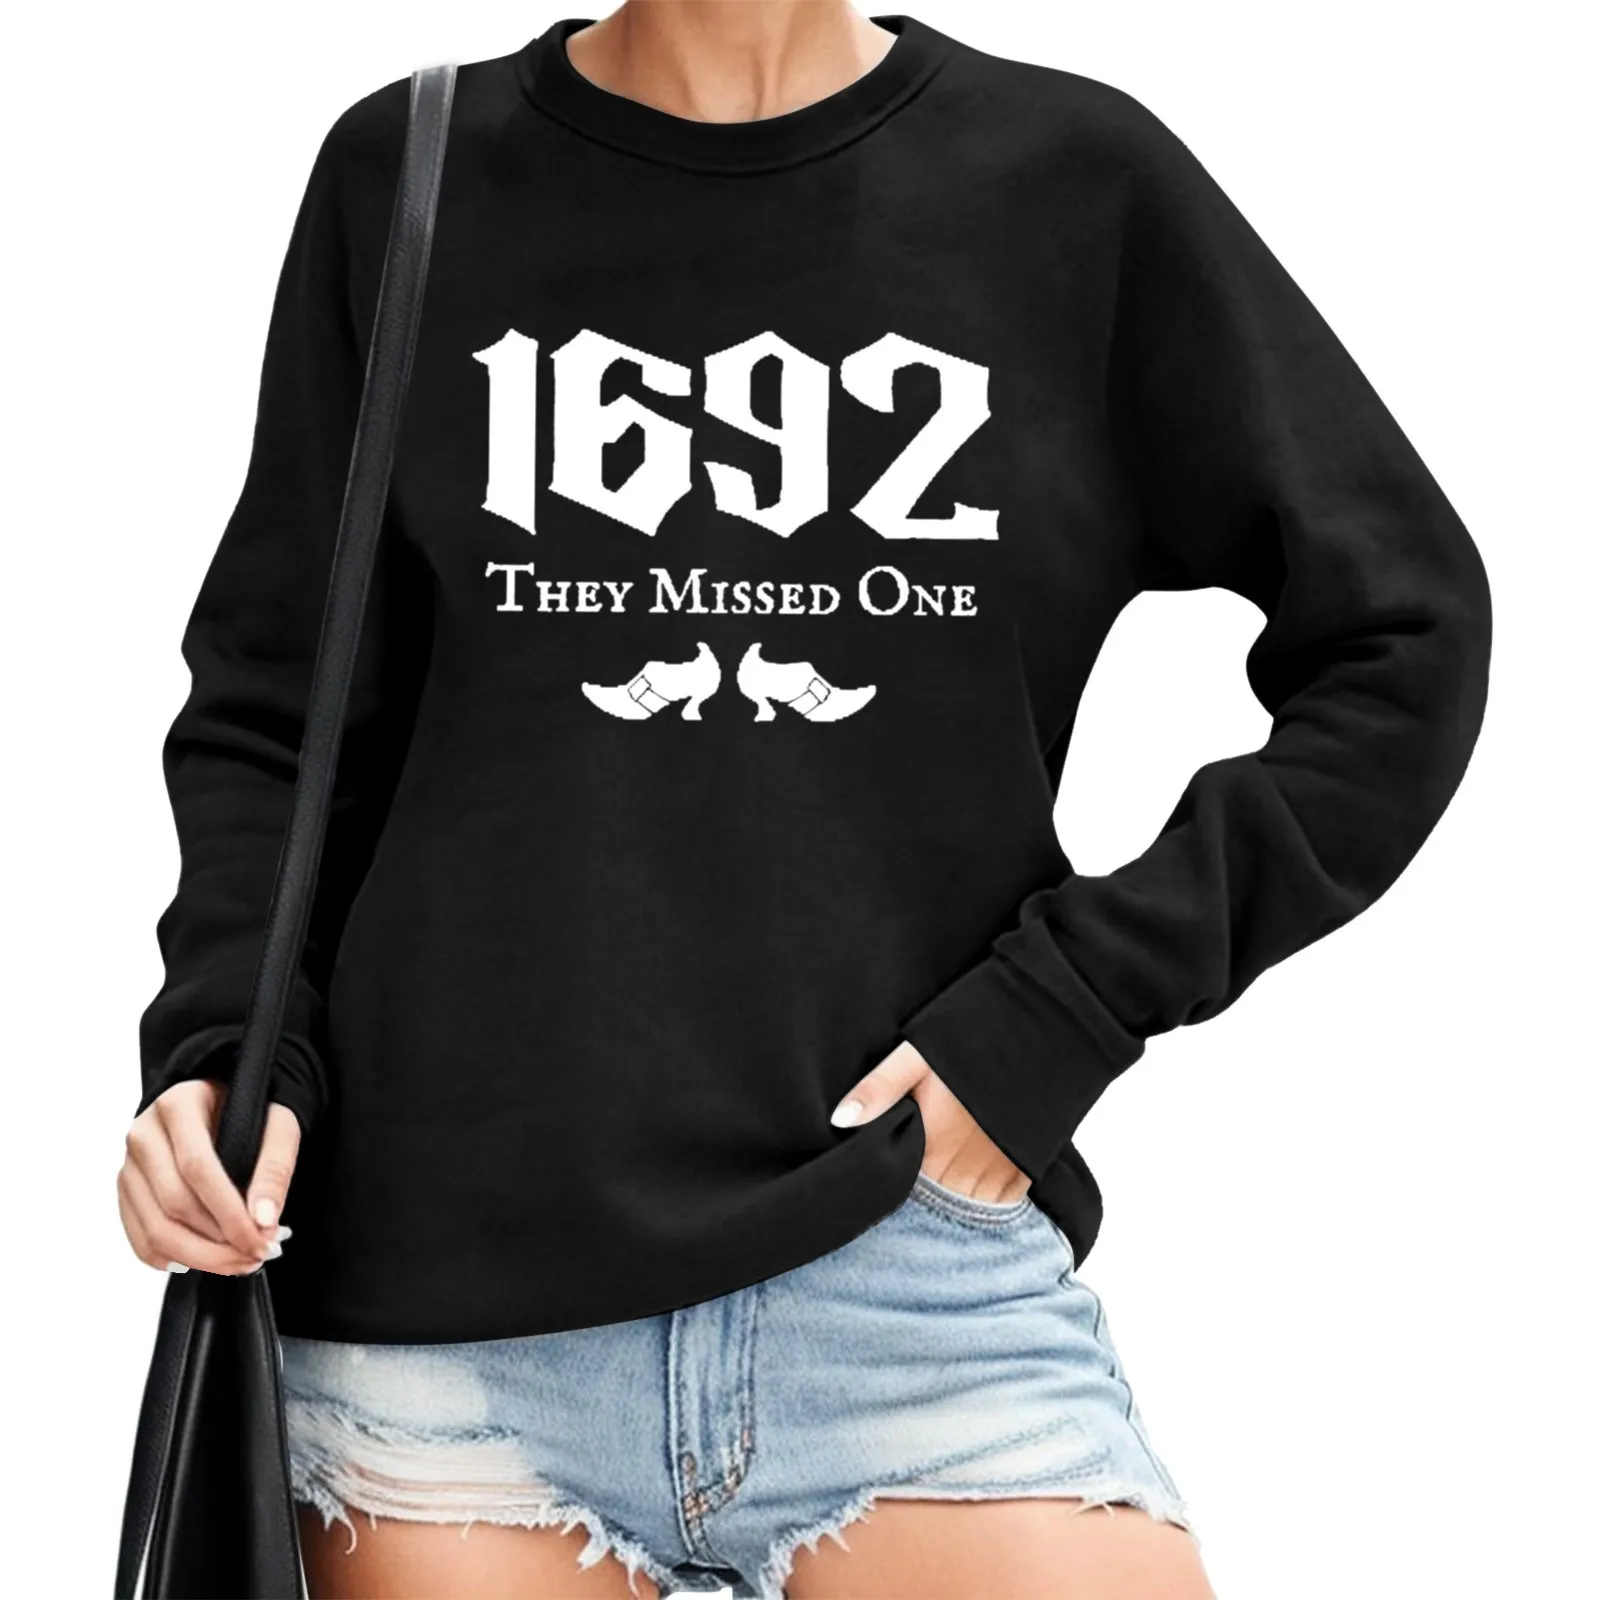 

Pullover Sweater Tops For Womens Print O Neck Sweatshirt Round Neck Fit Fairycore Cropped Tops Exercise preppy style